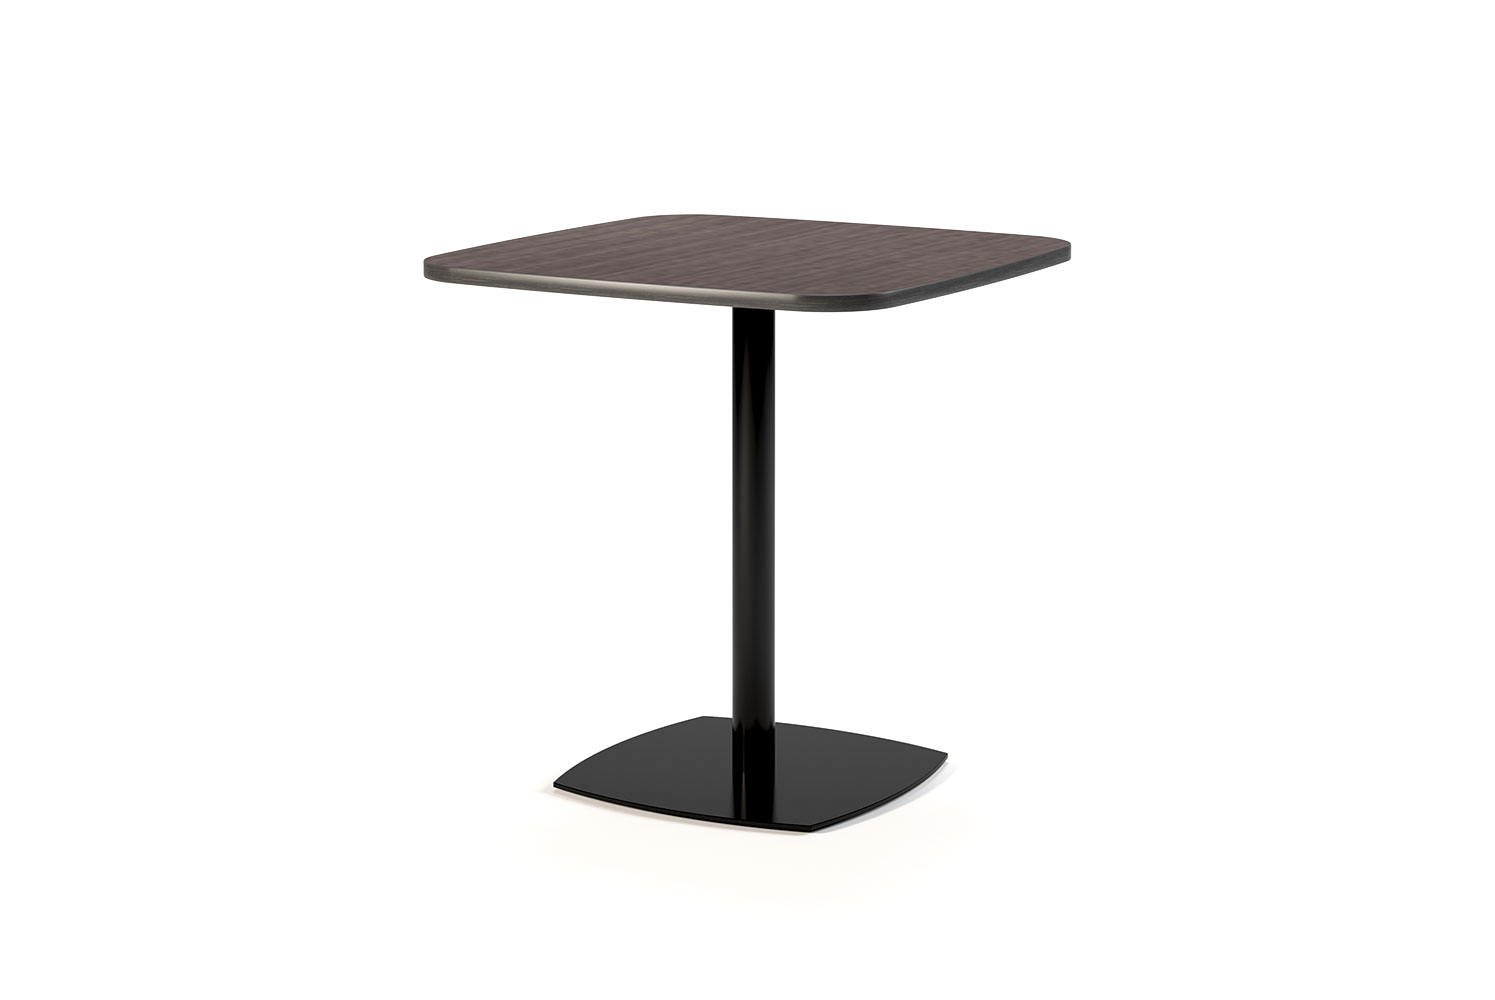 Dalma 36 Almost Square Bar Height Table